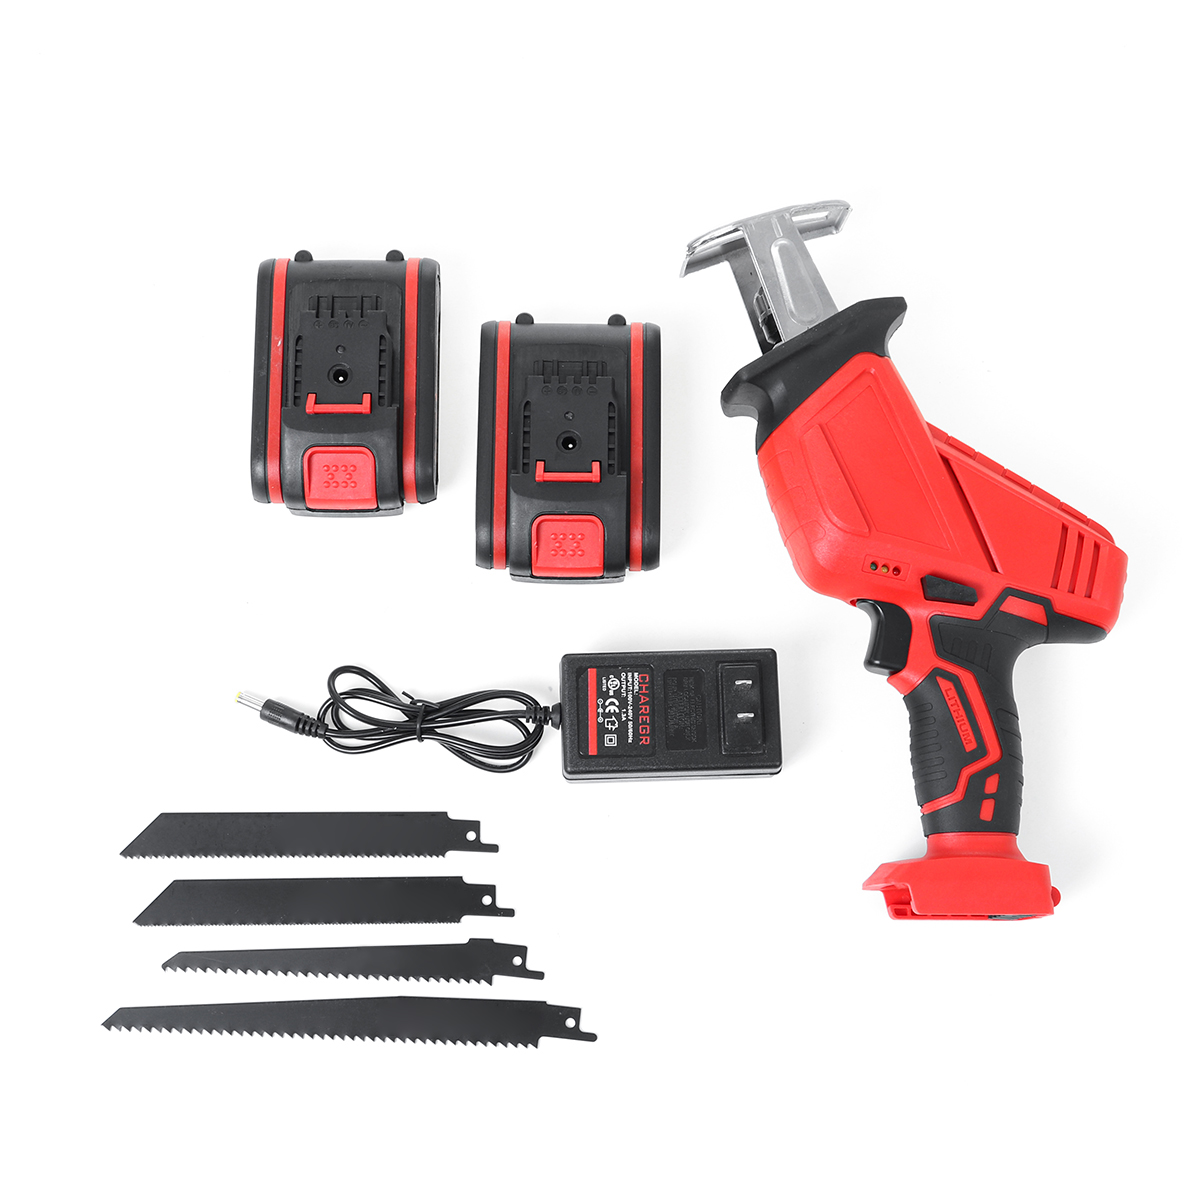 21V-88VF-Electric-Saw-Cordless-Charging-Reciprocating-Saw-Kit-LED-Light-2-Battery-Wood-Cutter-Set-1670502-9